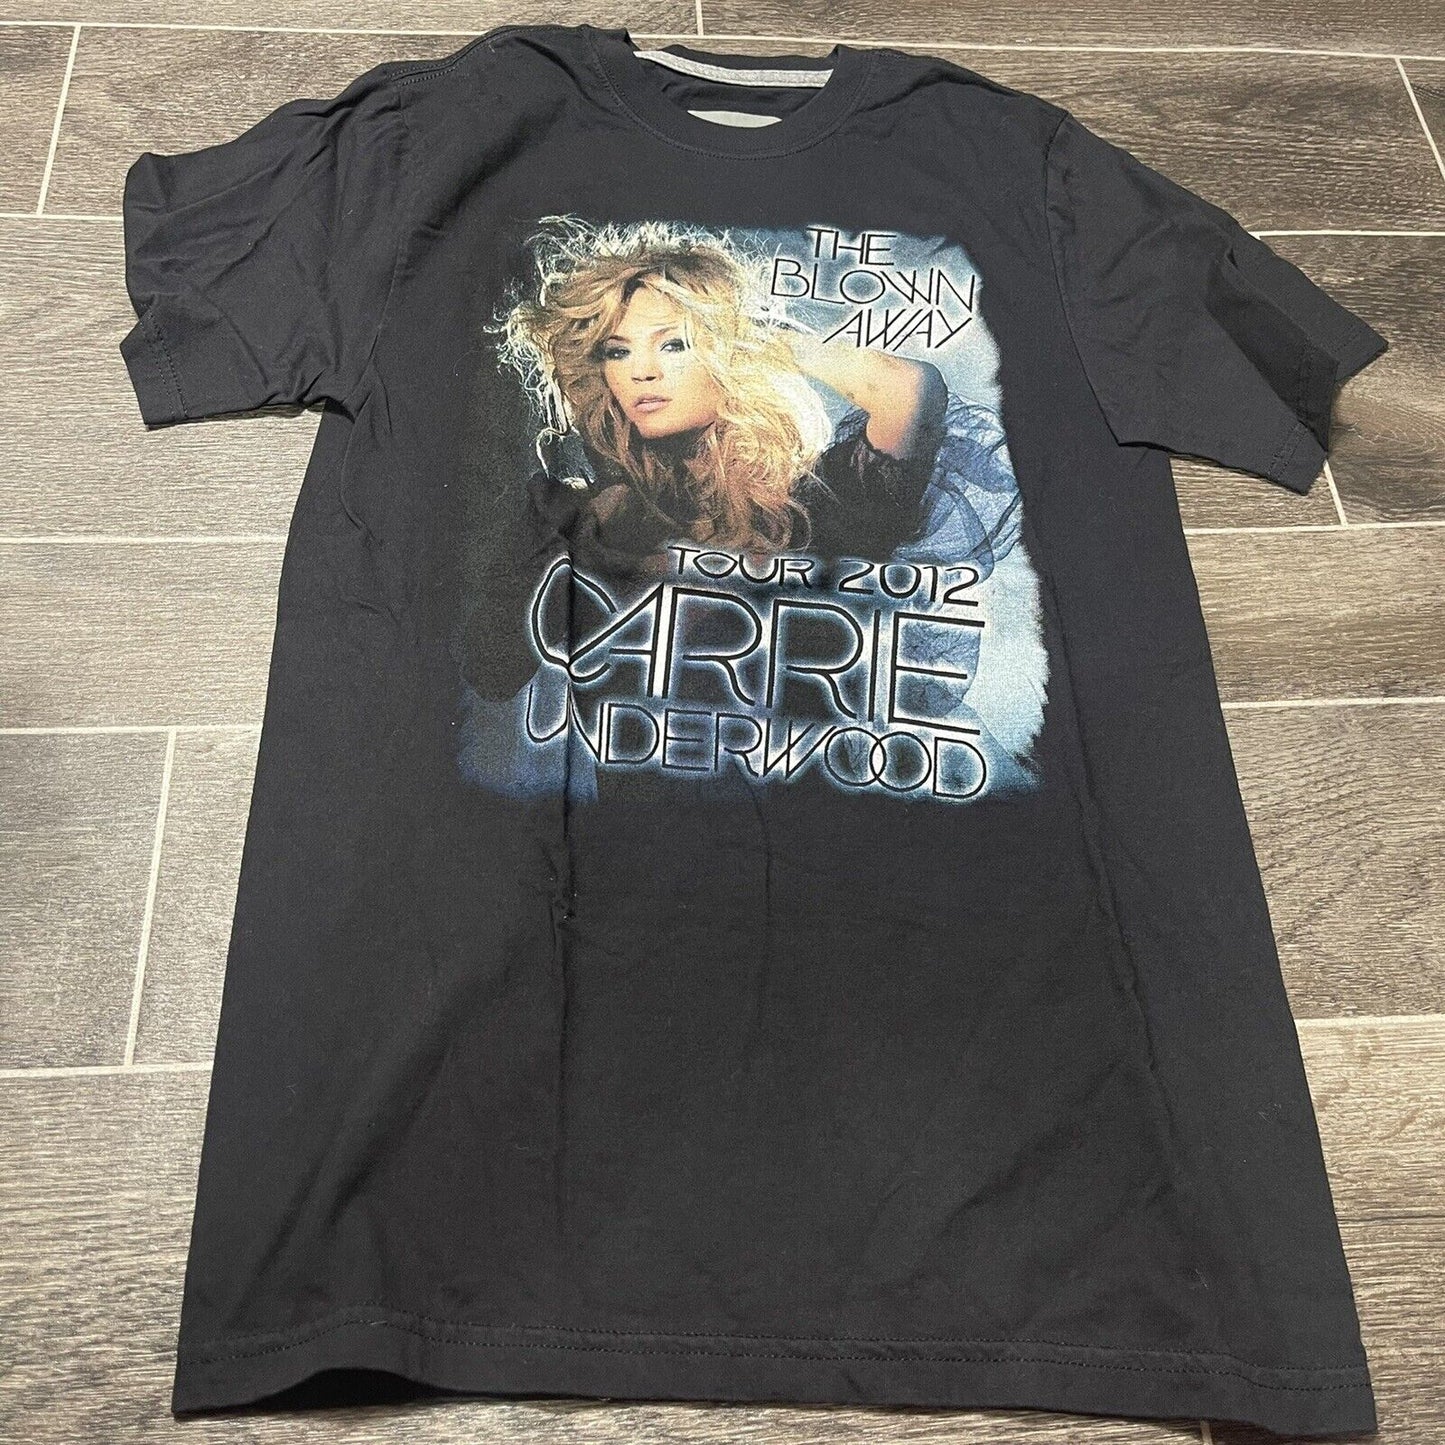 Carrie Underwood The Blown Away Tour 2012 T-shirt w/ Hunter Hayes Size Small